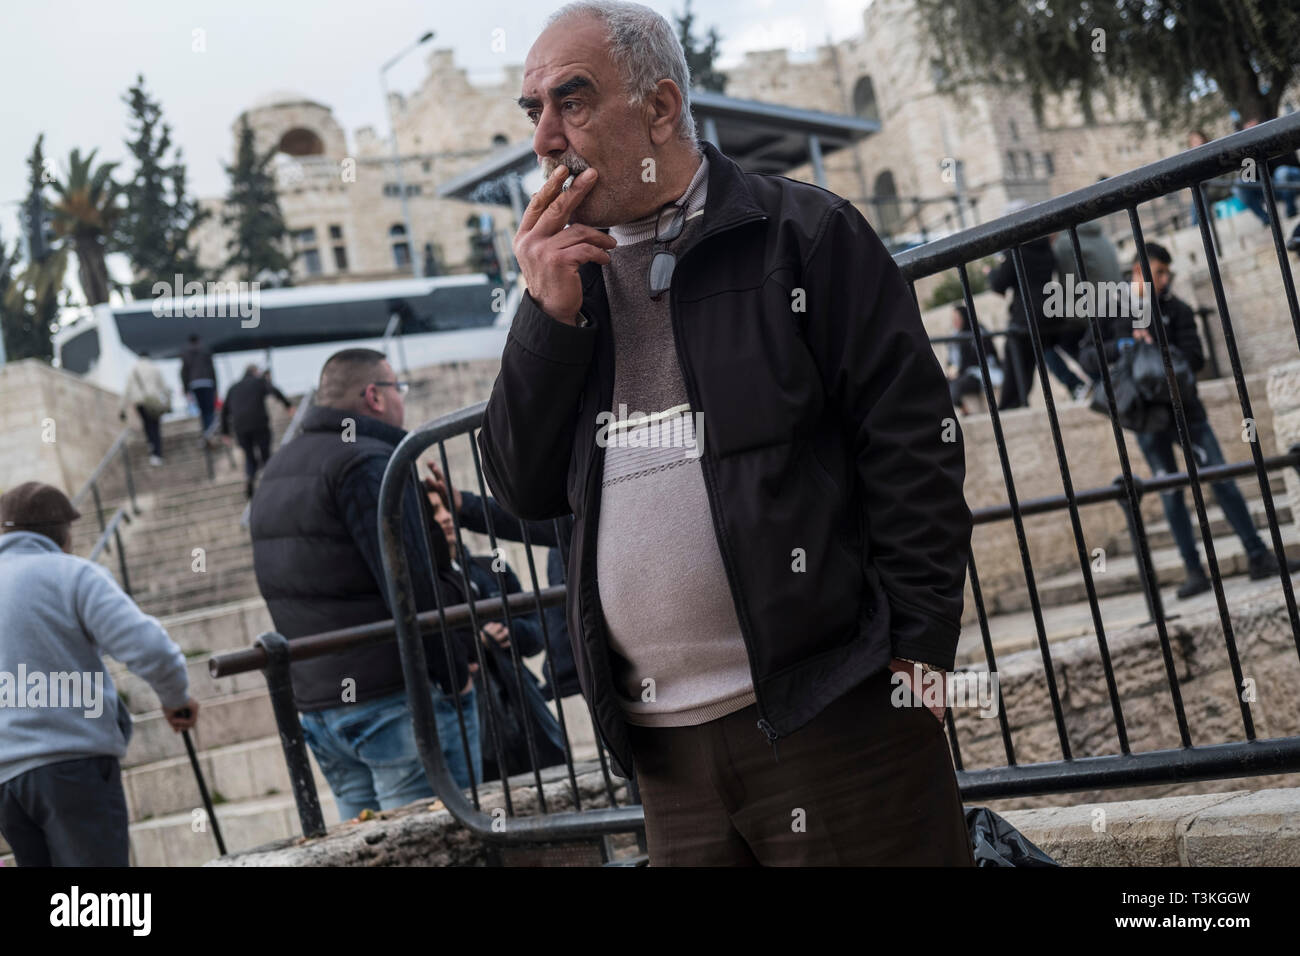 Smoking a cigarette an elderly Palestinian man stands near the Damascus Gate in East Jerusalem, Israel, 15/03/19 Stock Photo